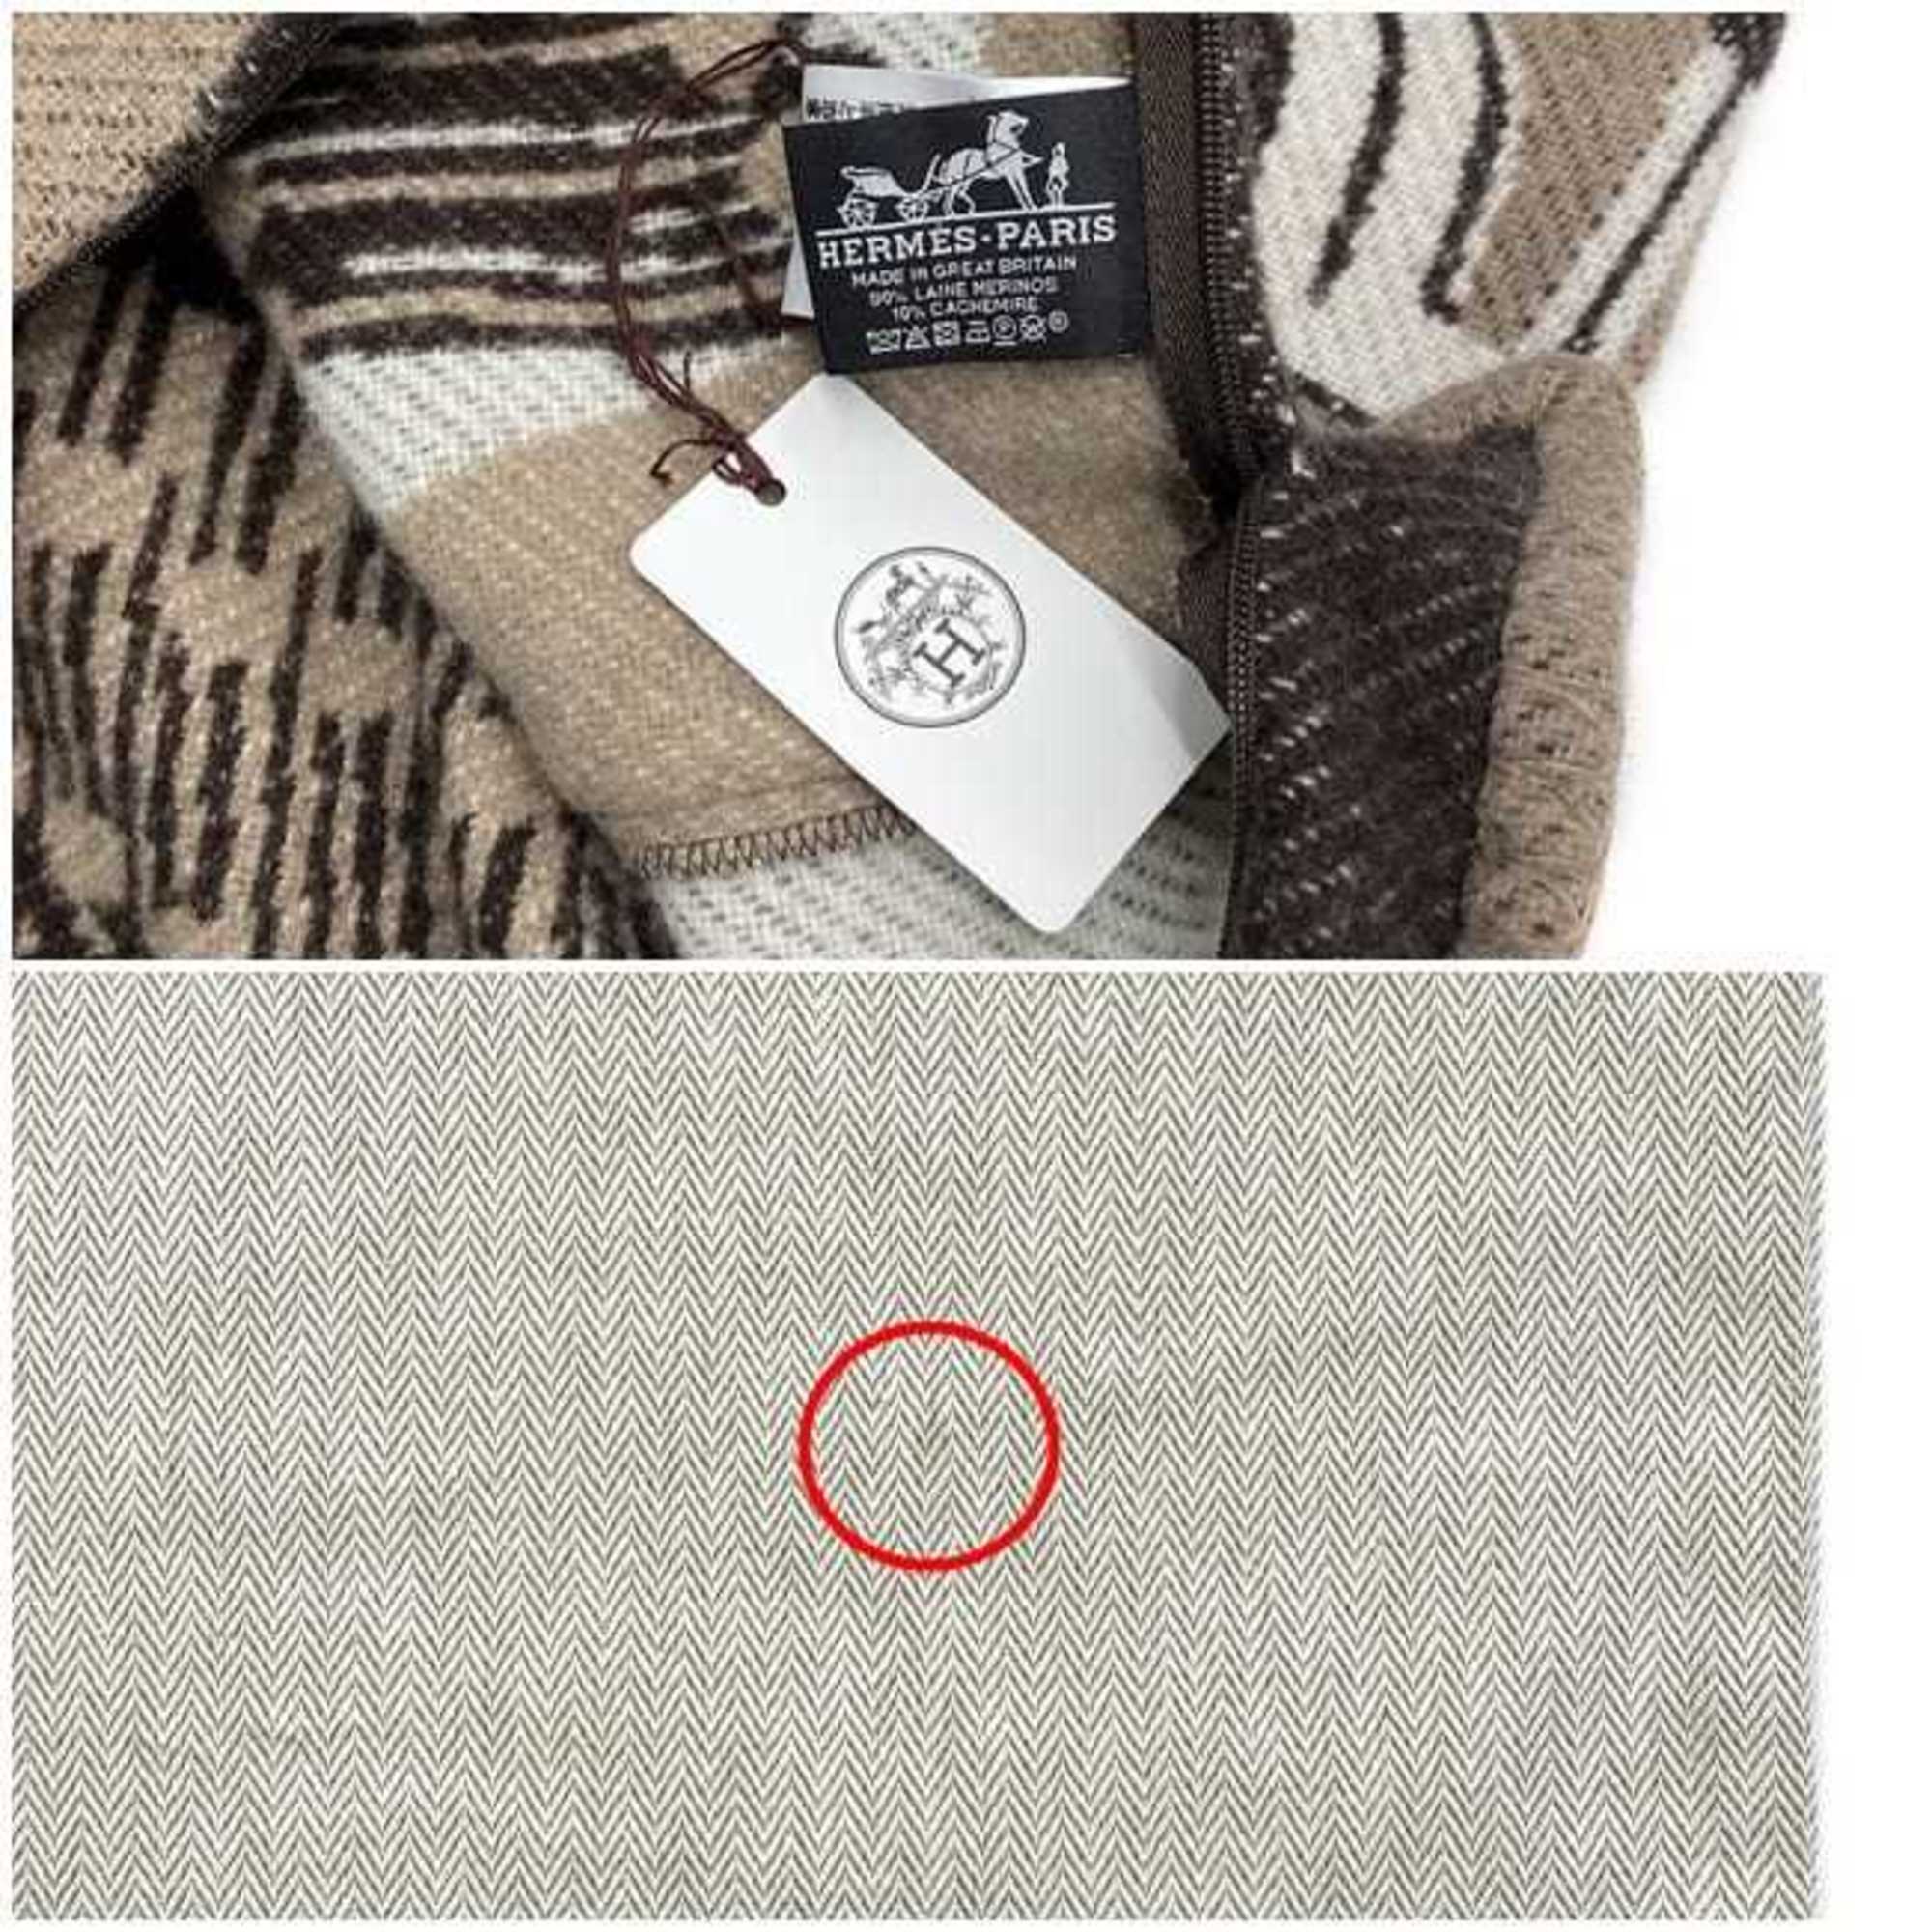 Hermes Cushion Brown Beige Wool Cashmere HERMES Cover Square 50cm Miscellaneous Natural Living Relax Goods